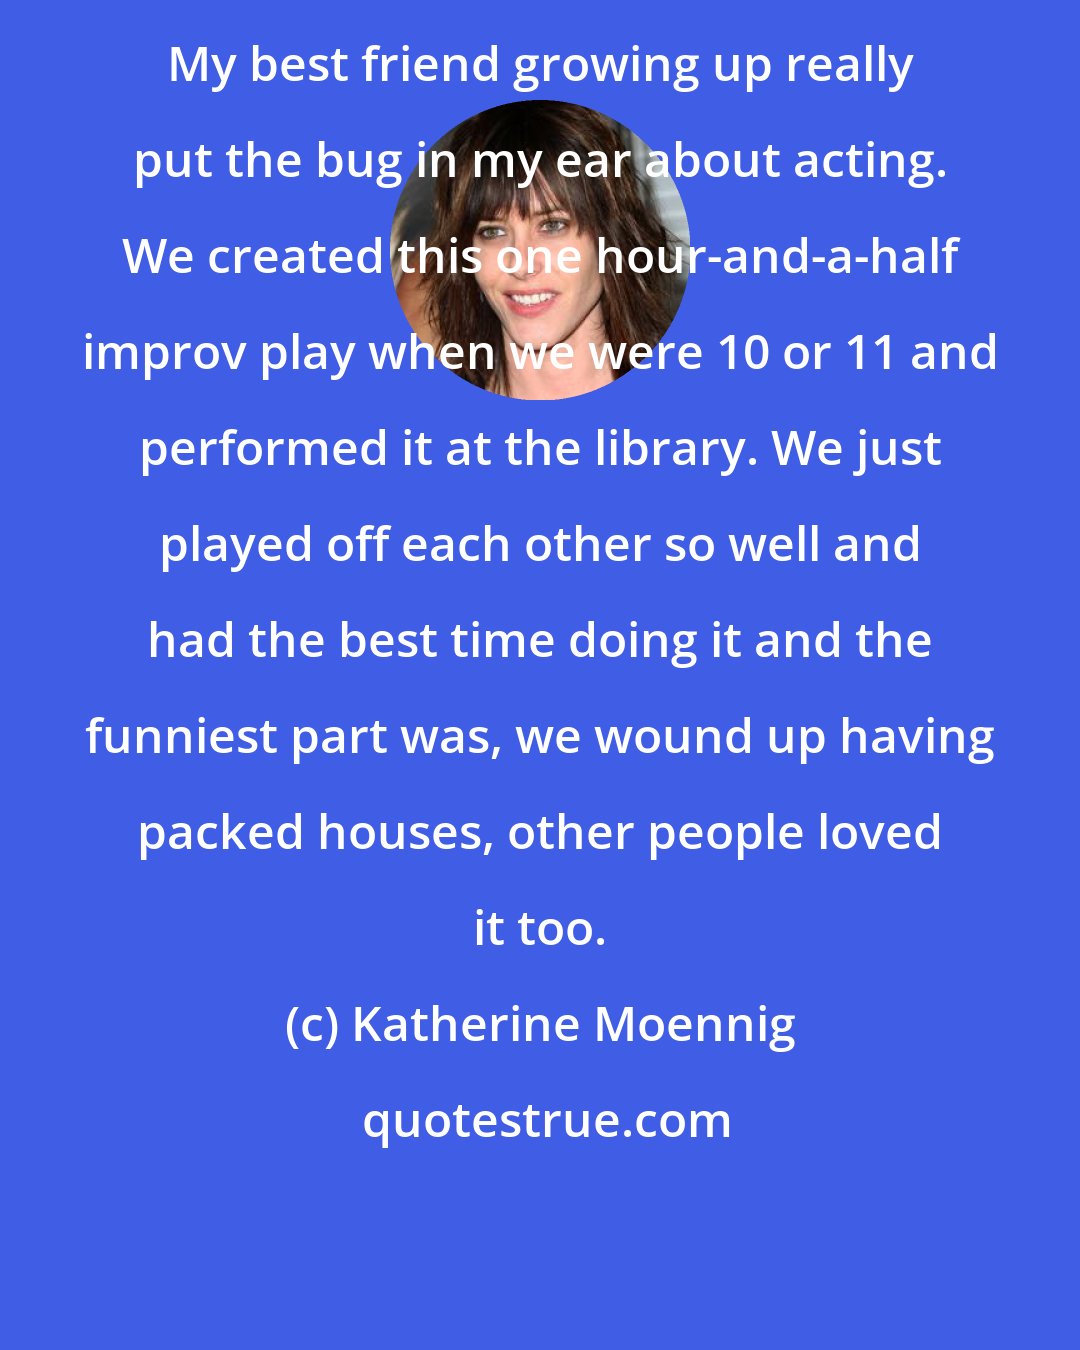 Katherine Moennig: My best friend growing up really put the bug in my ear about acting. We created this one hour-and-a-half improv play when we were 10 or 11 and performed it at the library. We just played off each other so well and had the best time doing it and the funniest part was, we wound up having packed houses, other people loved it too.